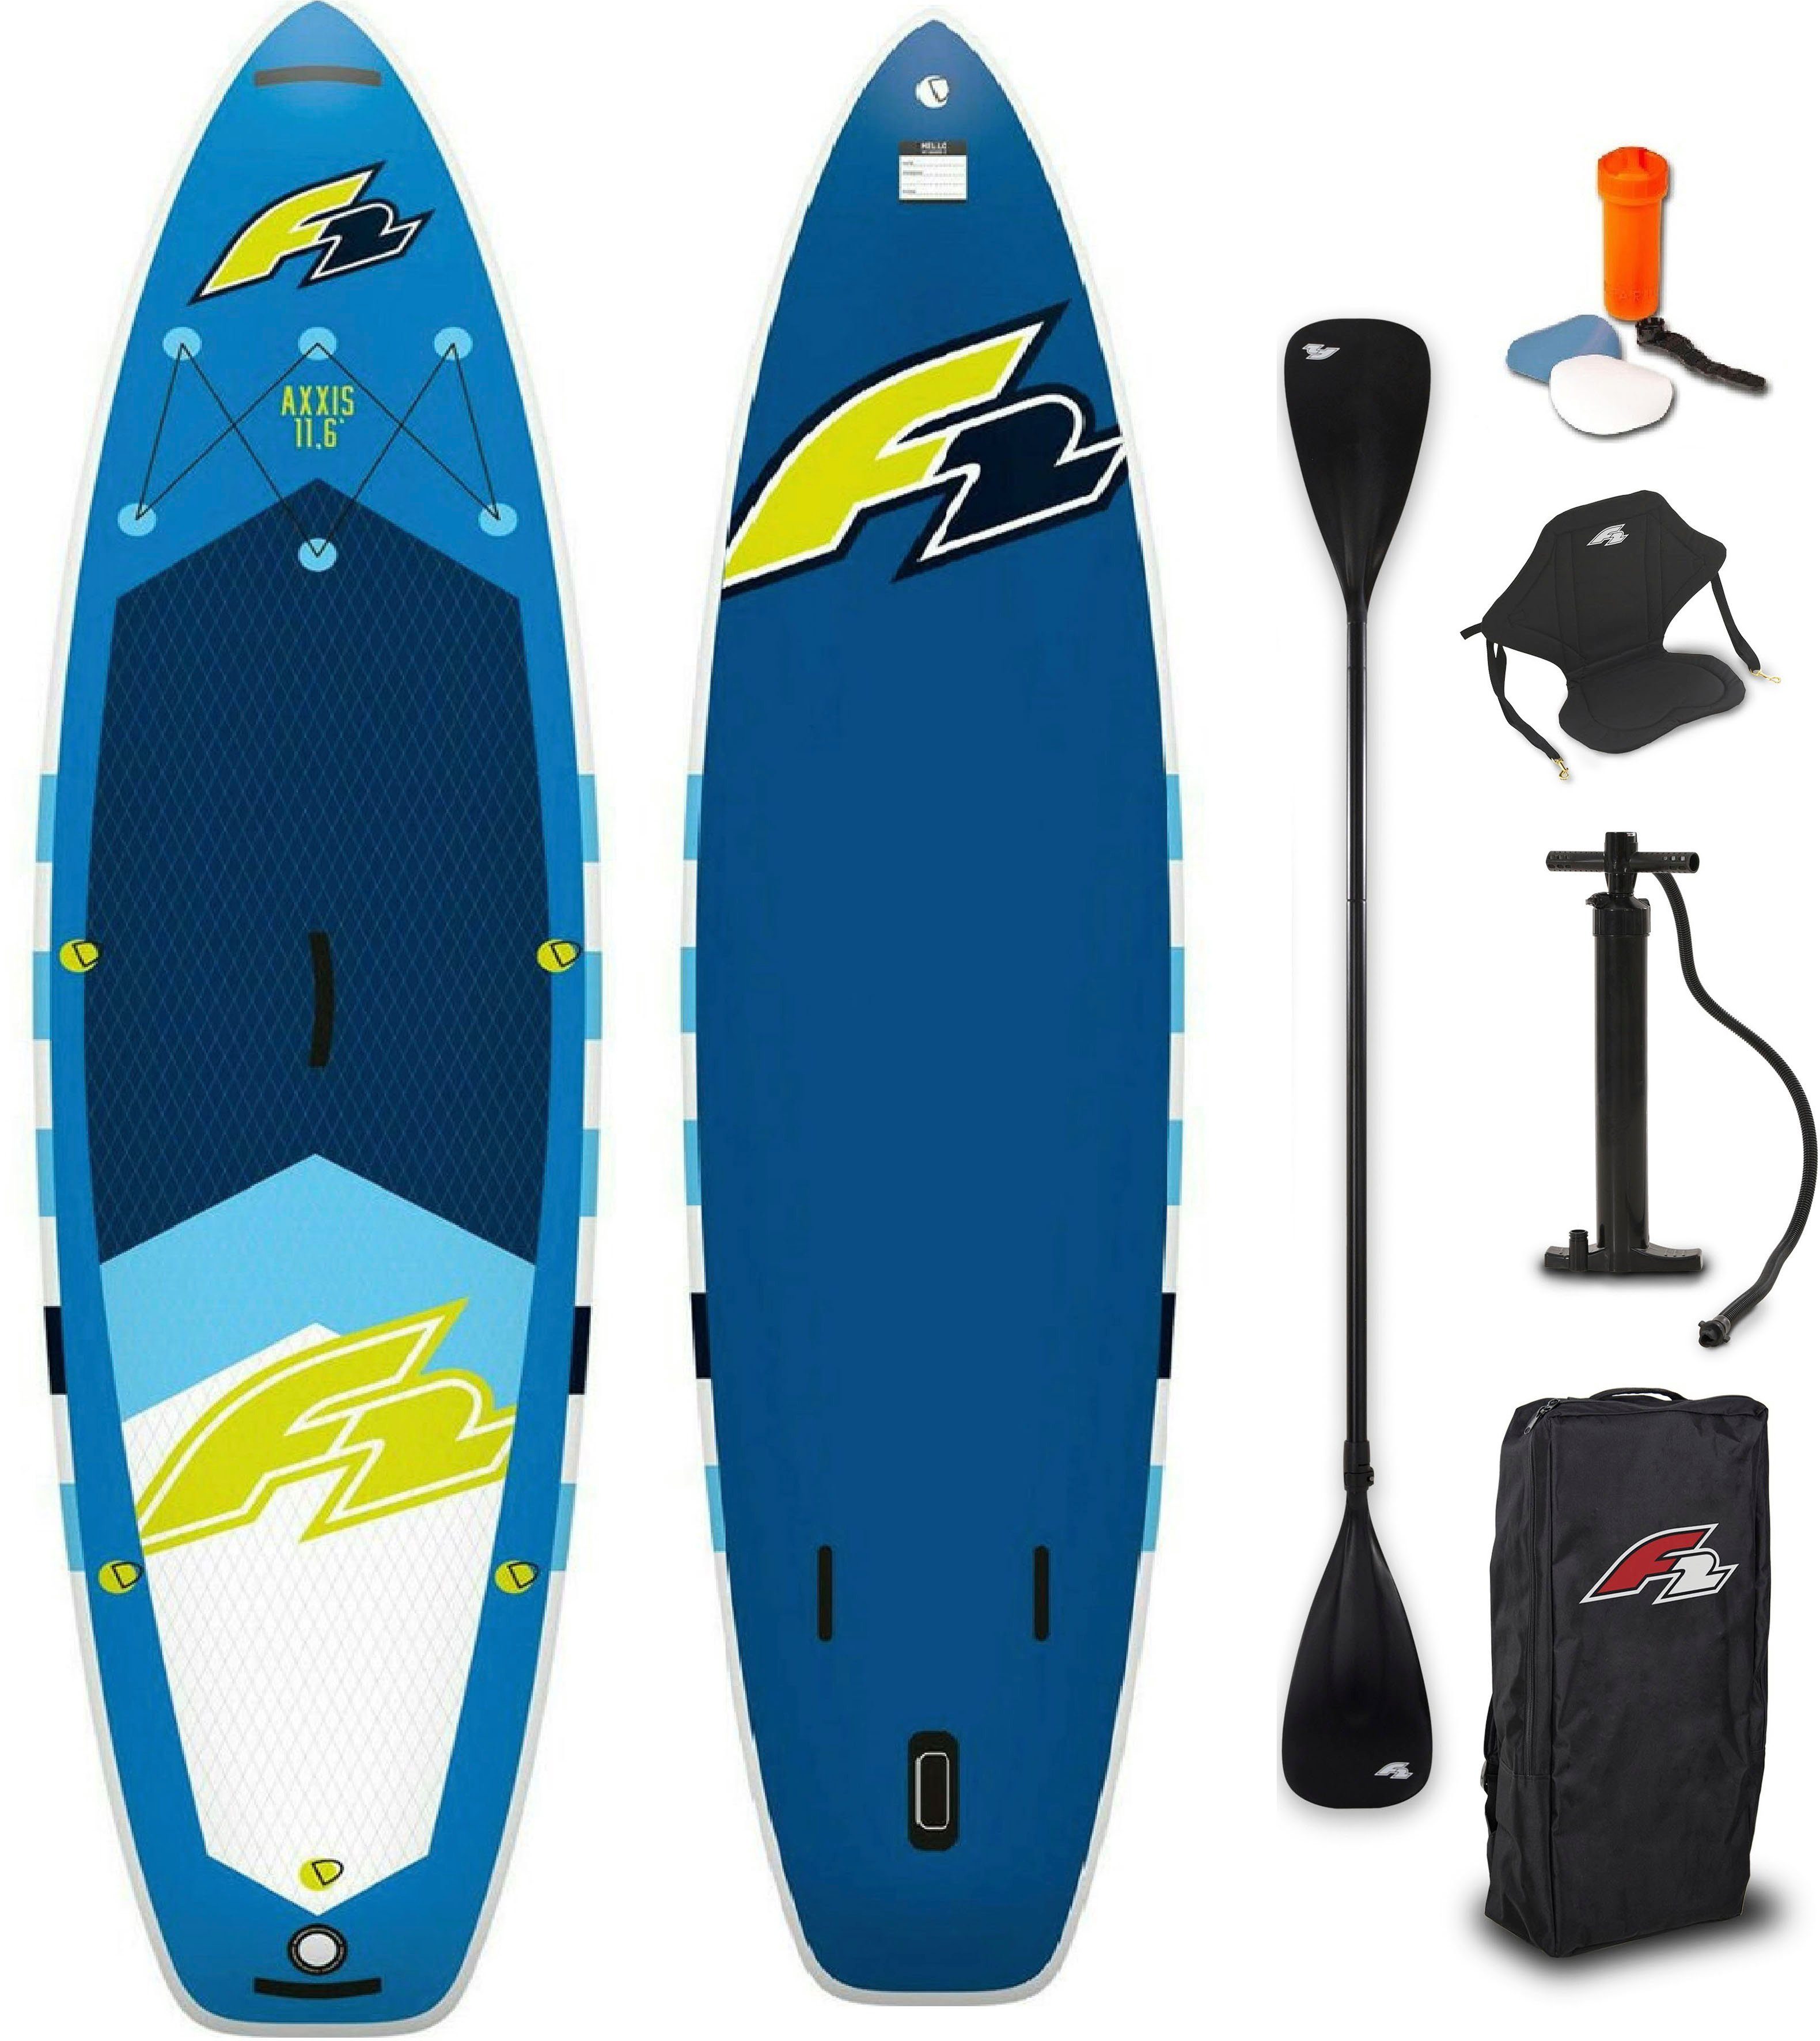 tlg) Inflatable SUP-Board Set (Set, Edition Ltd. 11,6 Axxis blue, 6 F2